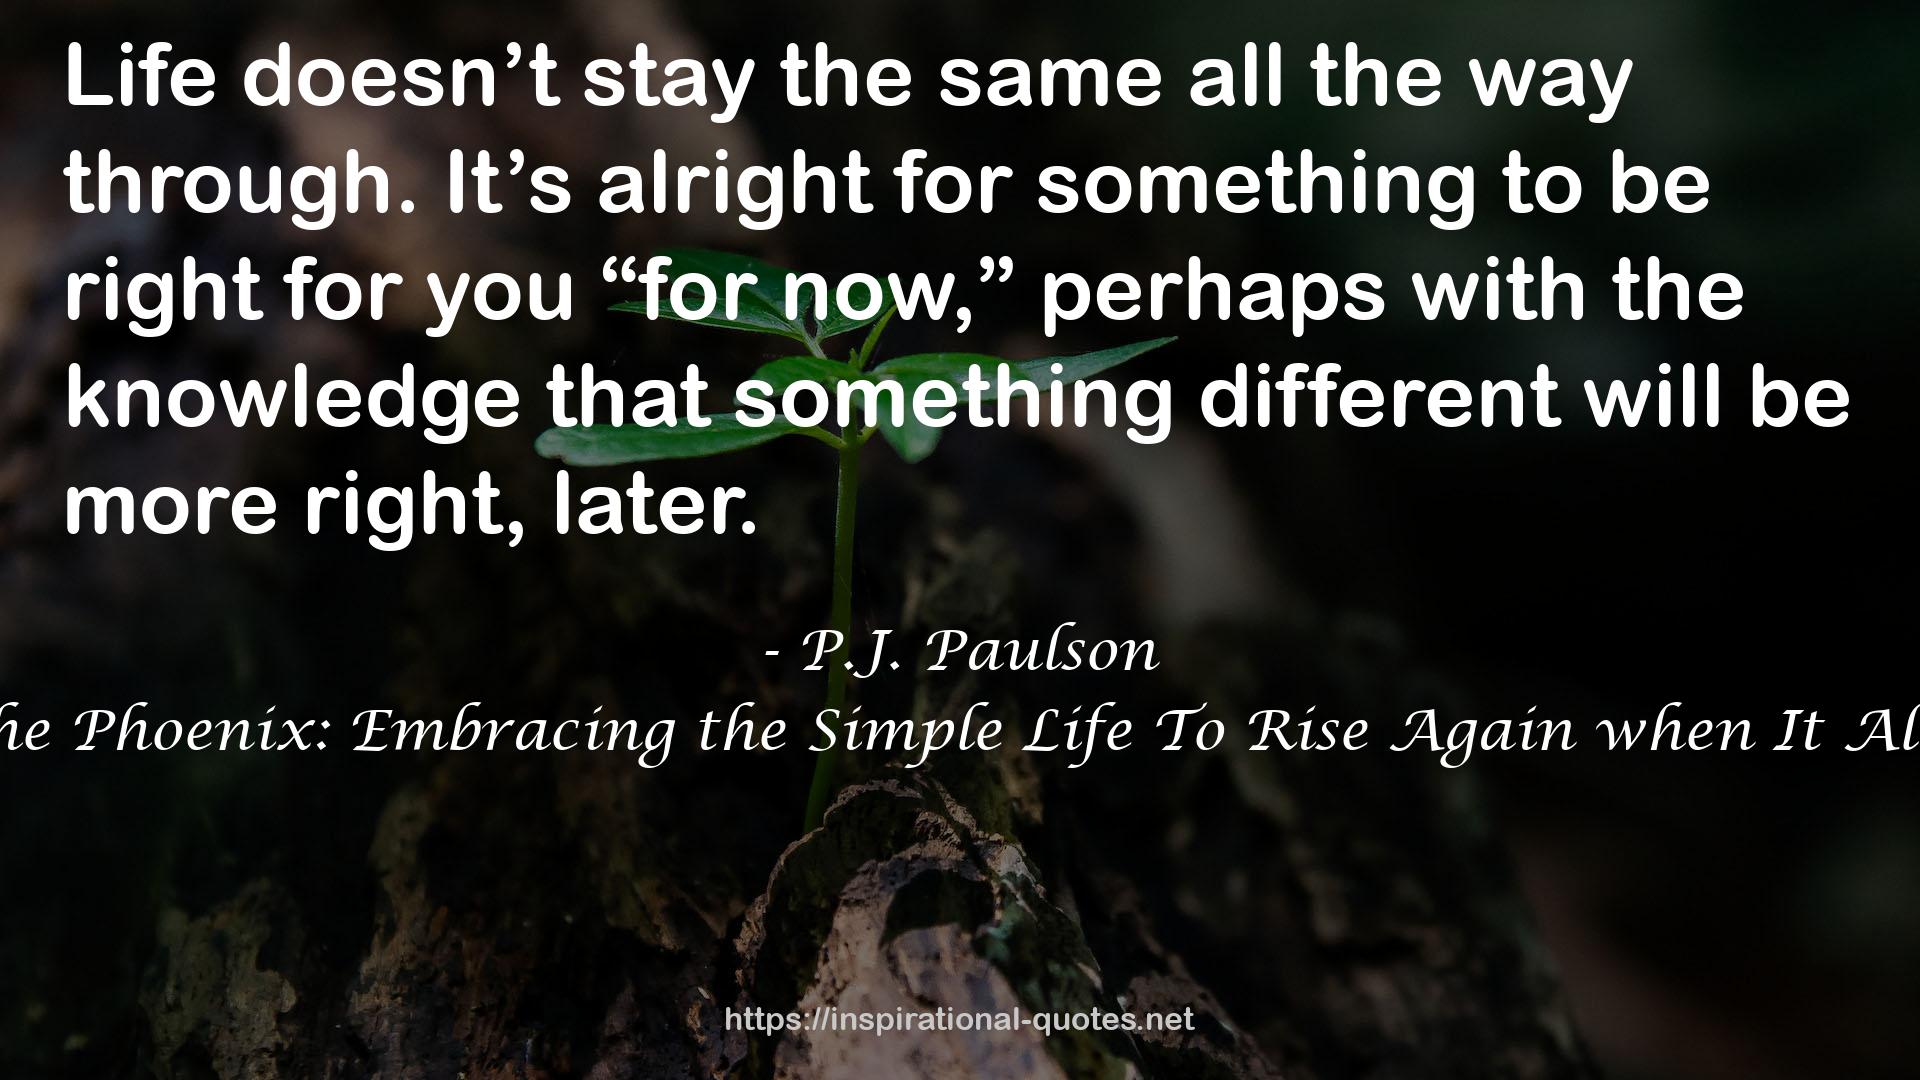 Summer of the Phoenix: Embracing the Simple Life To Rise Again when It All Falls Apart QUOTES